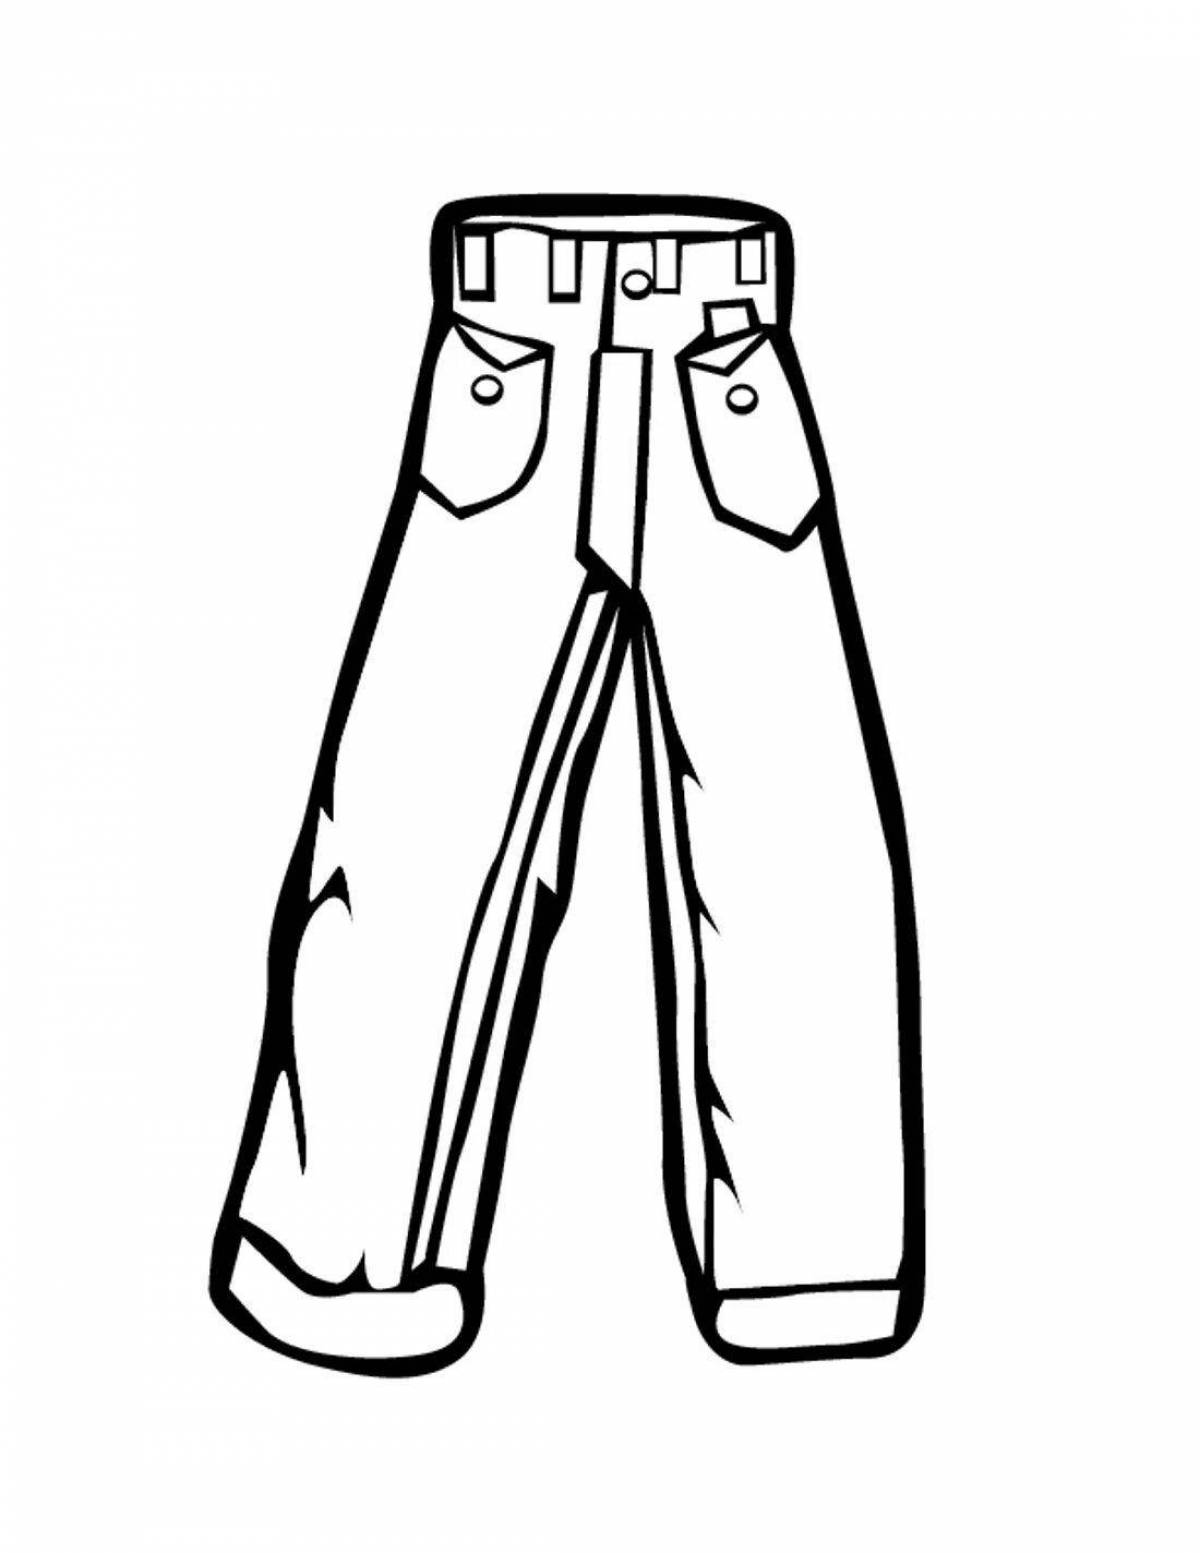 Coloring page happy trousers for children